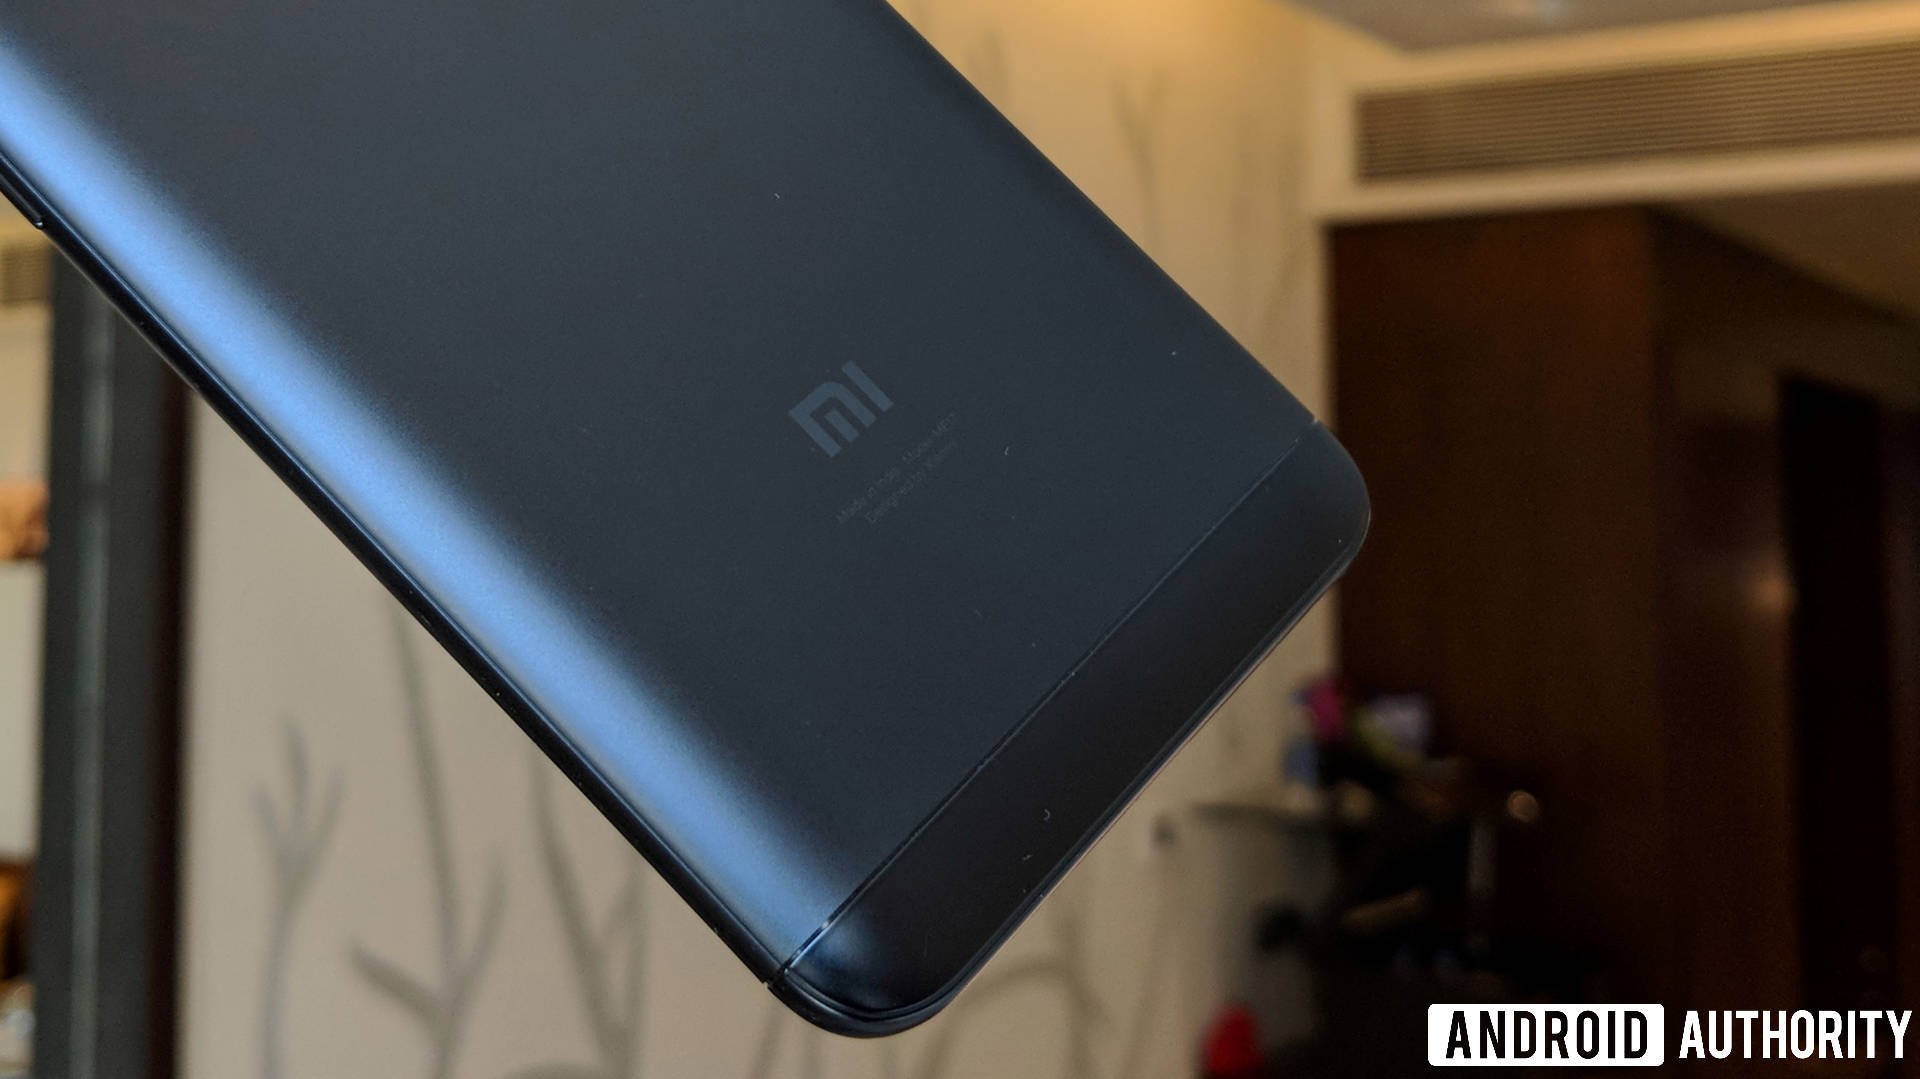 The rear of the Xiaomi Redmi Note 5, showing the logo.